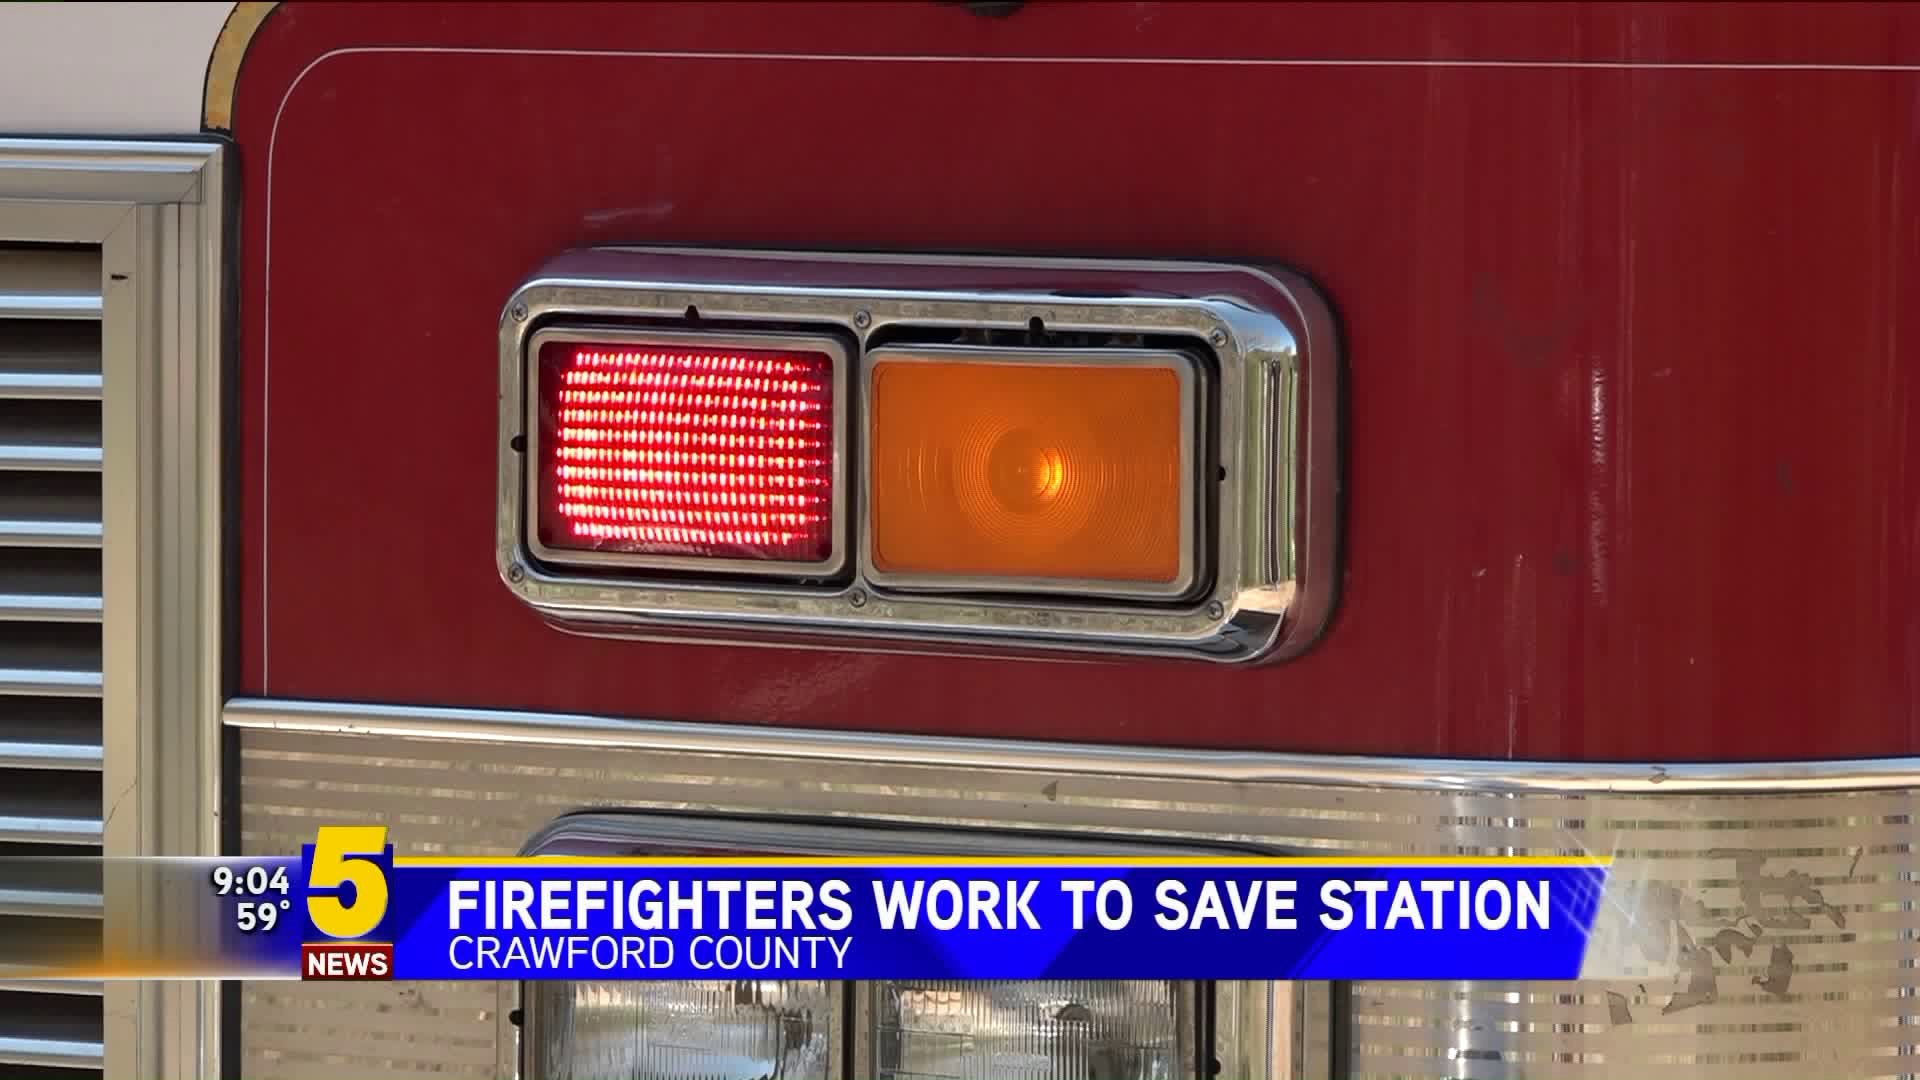 Firefighters Work To Save Station